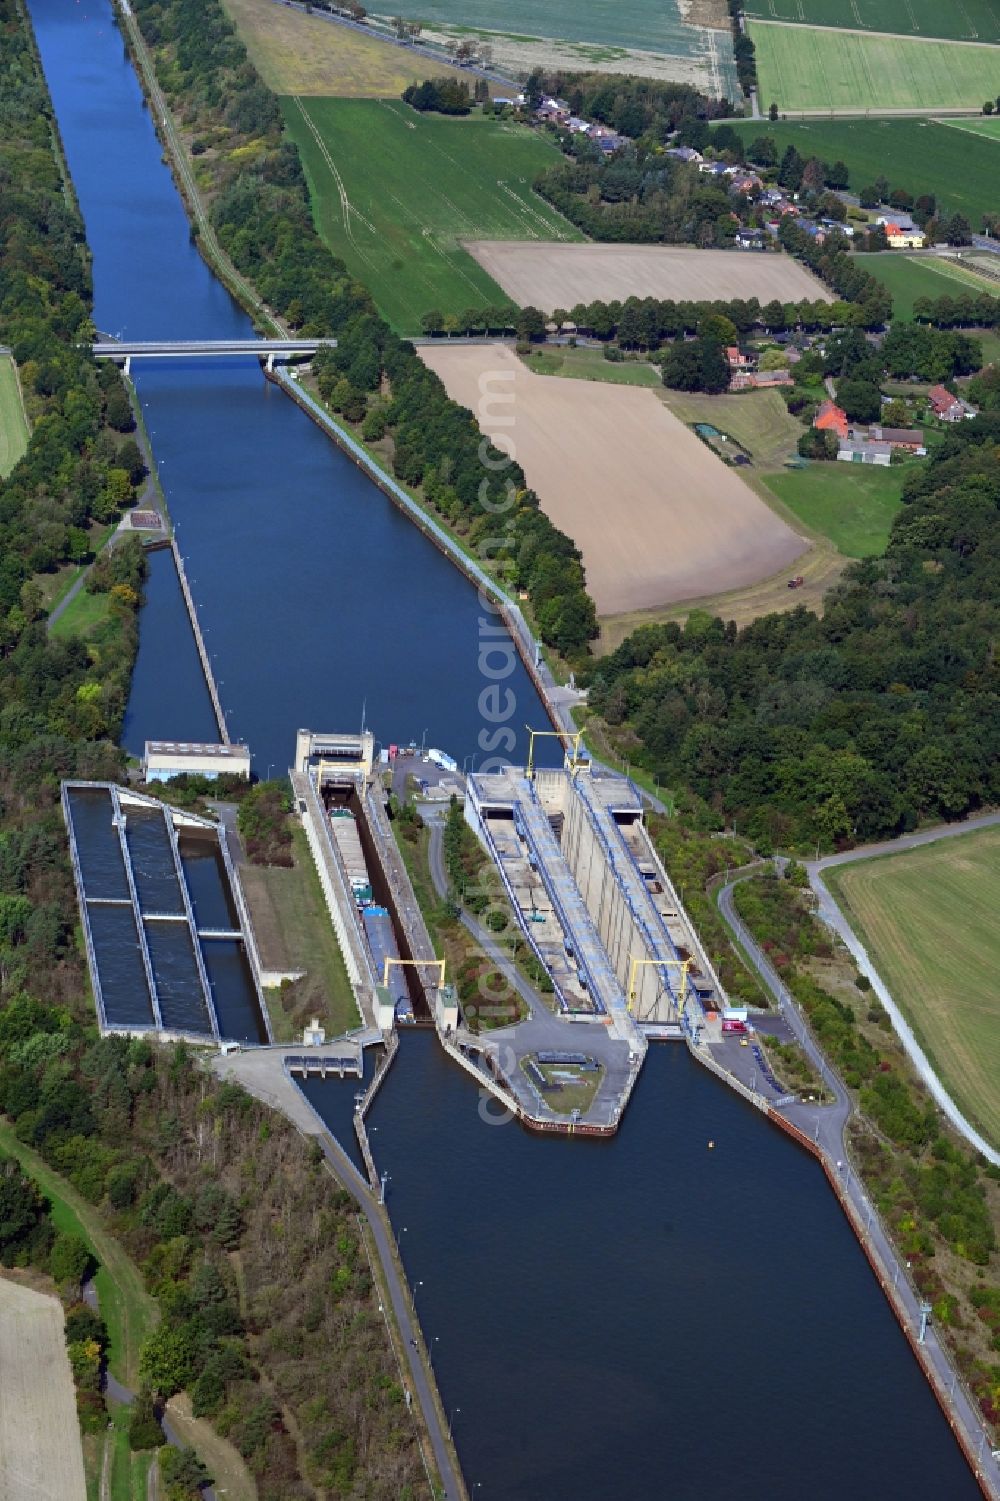 Aerial image Esterholz - Locks - plants on the banks of the waterway of the Elbe-Seitenkanal in Esterholz in the state Lower Saxony, Germany